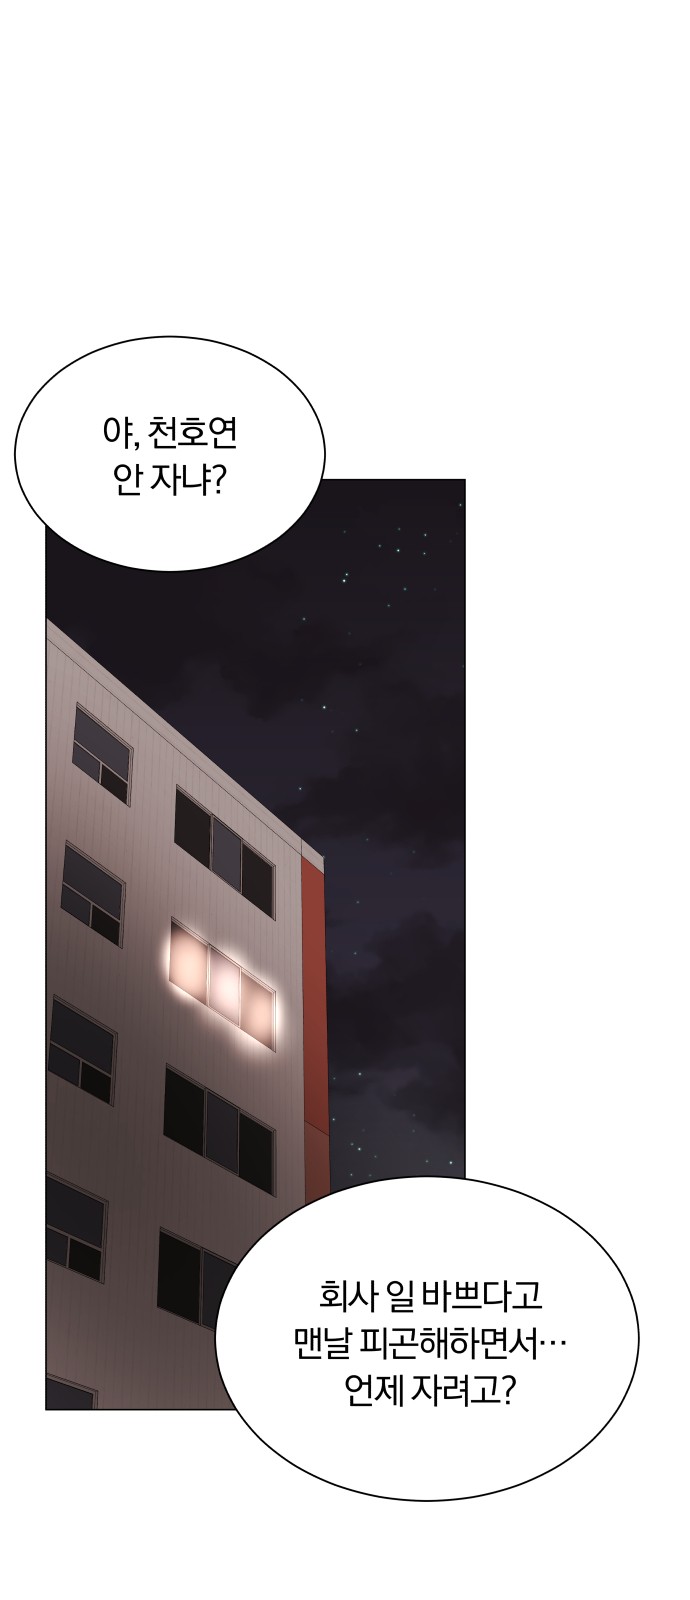 Superstar Cheon Dae-ri - Chapter 41 - Page 1